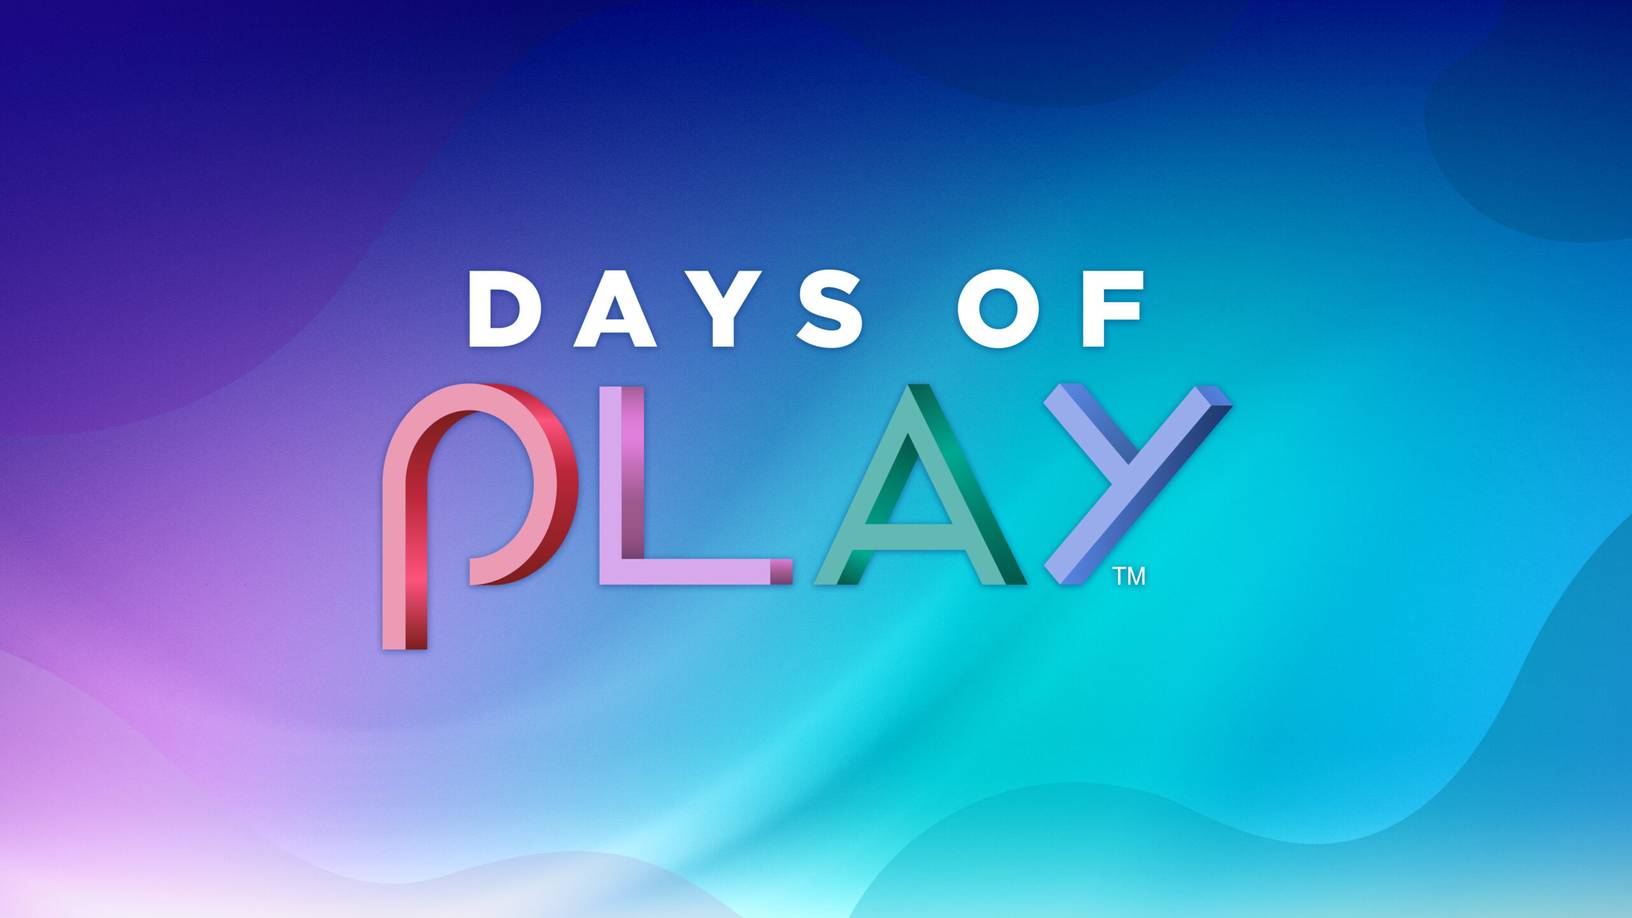 Image for PlayStation's Days of Play 2022 sale is now on for PS4 and PS5